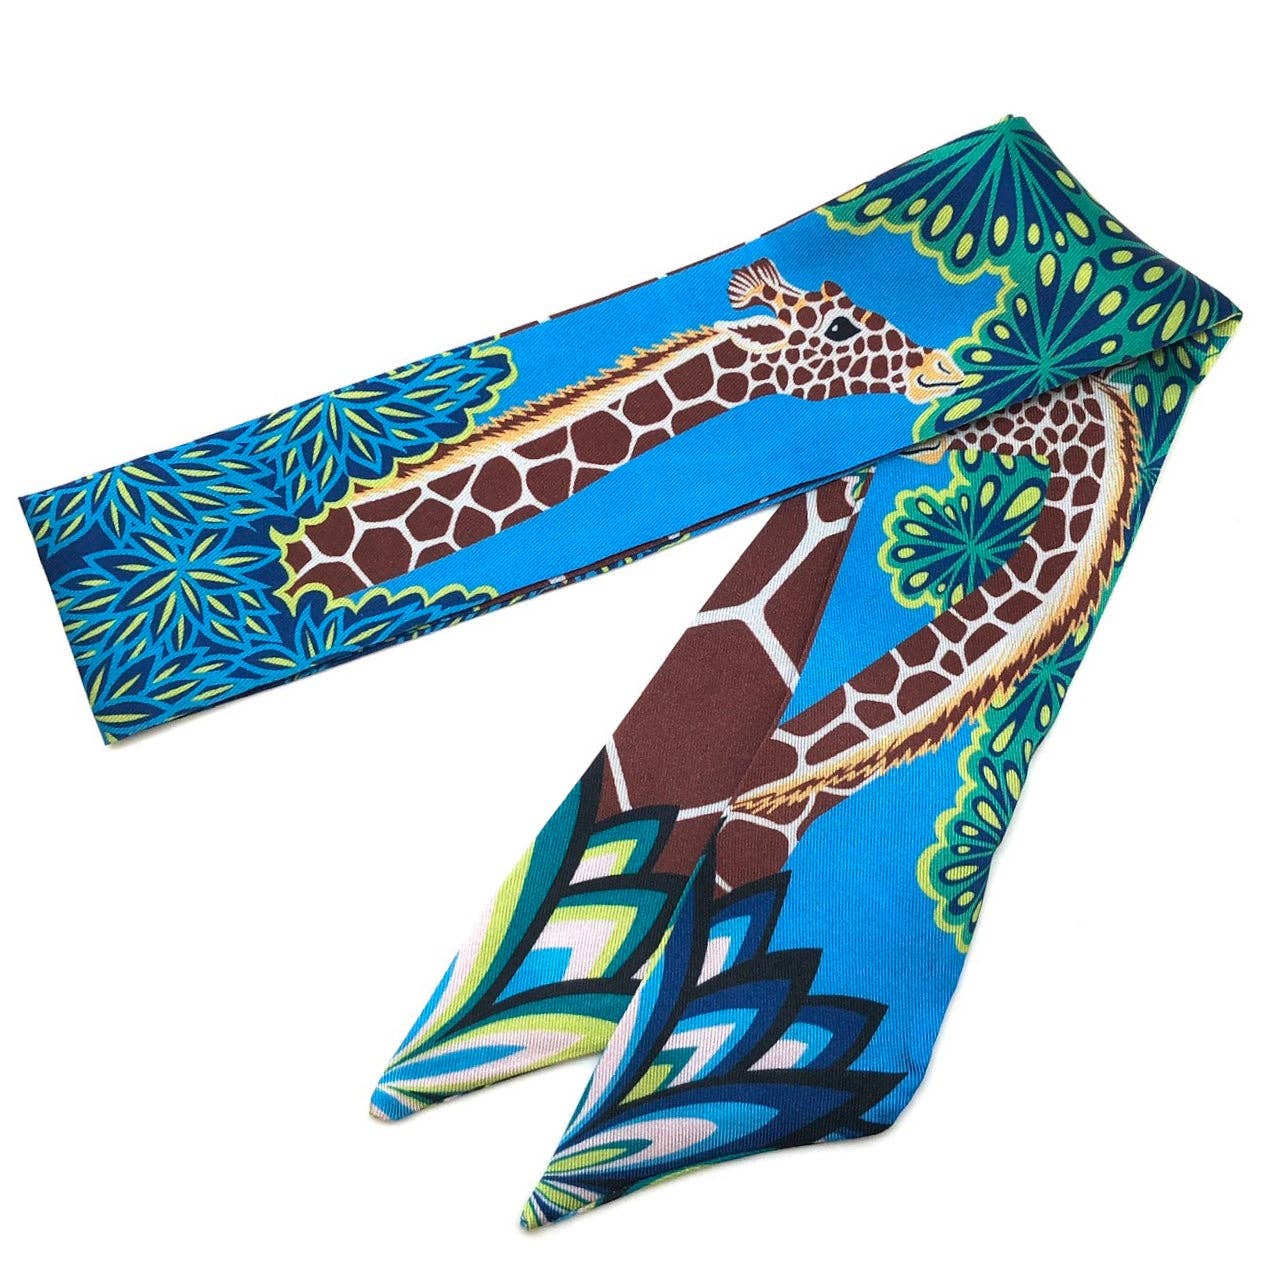 Twilly Scarf in Jungle Love Print